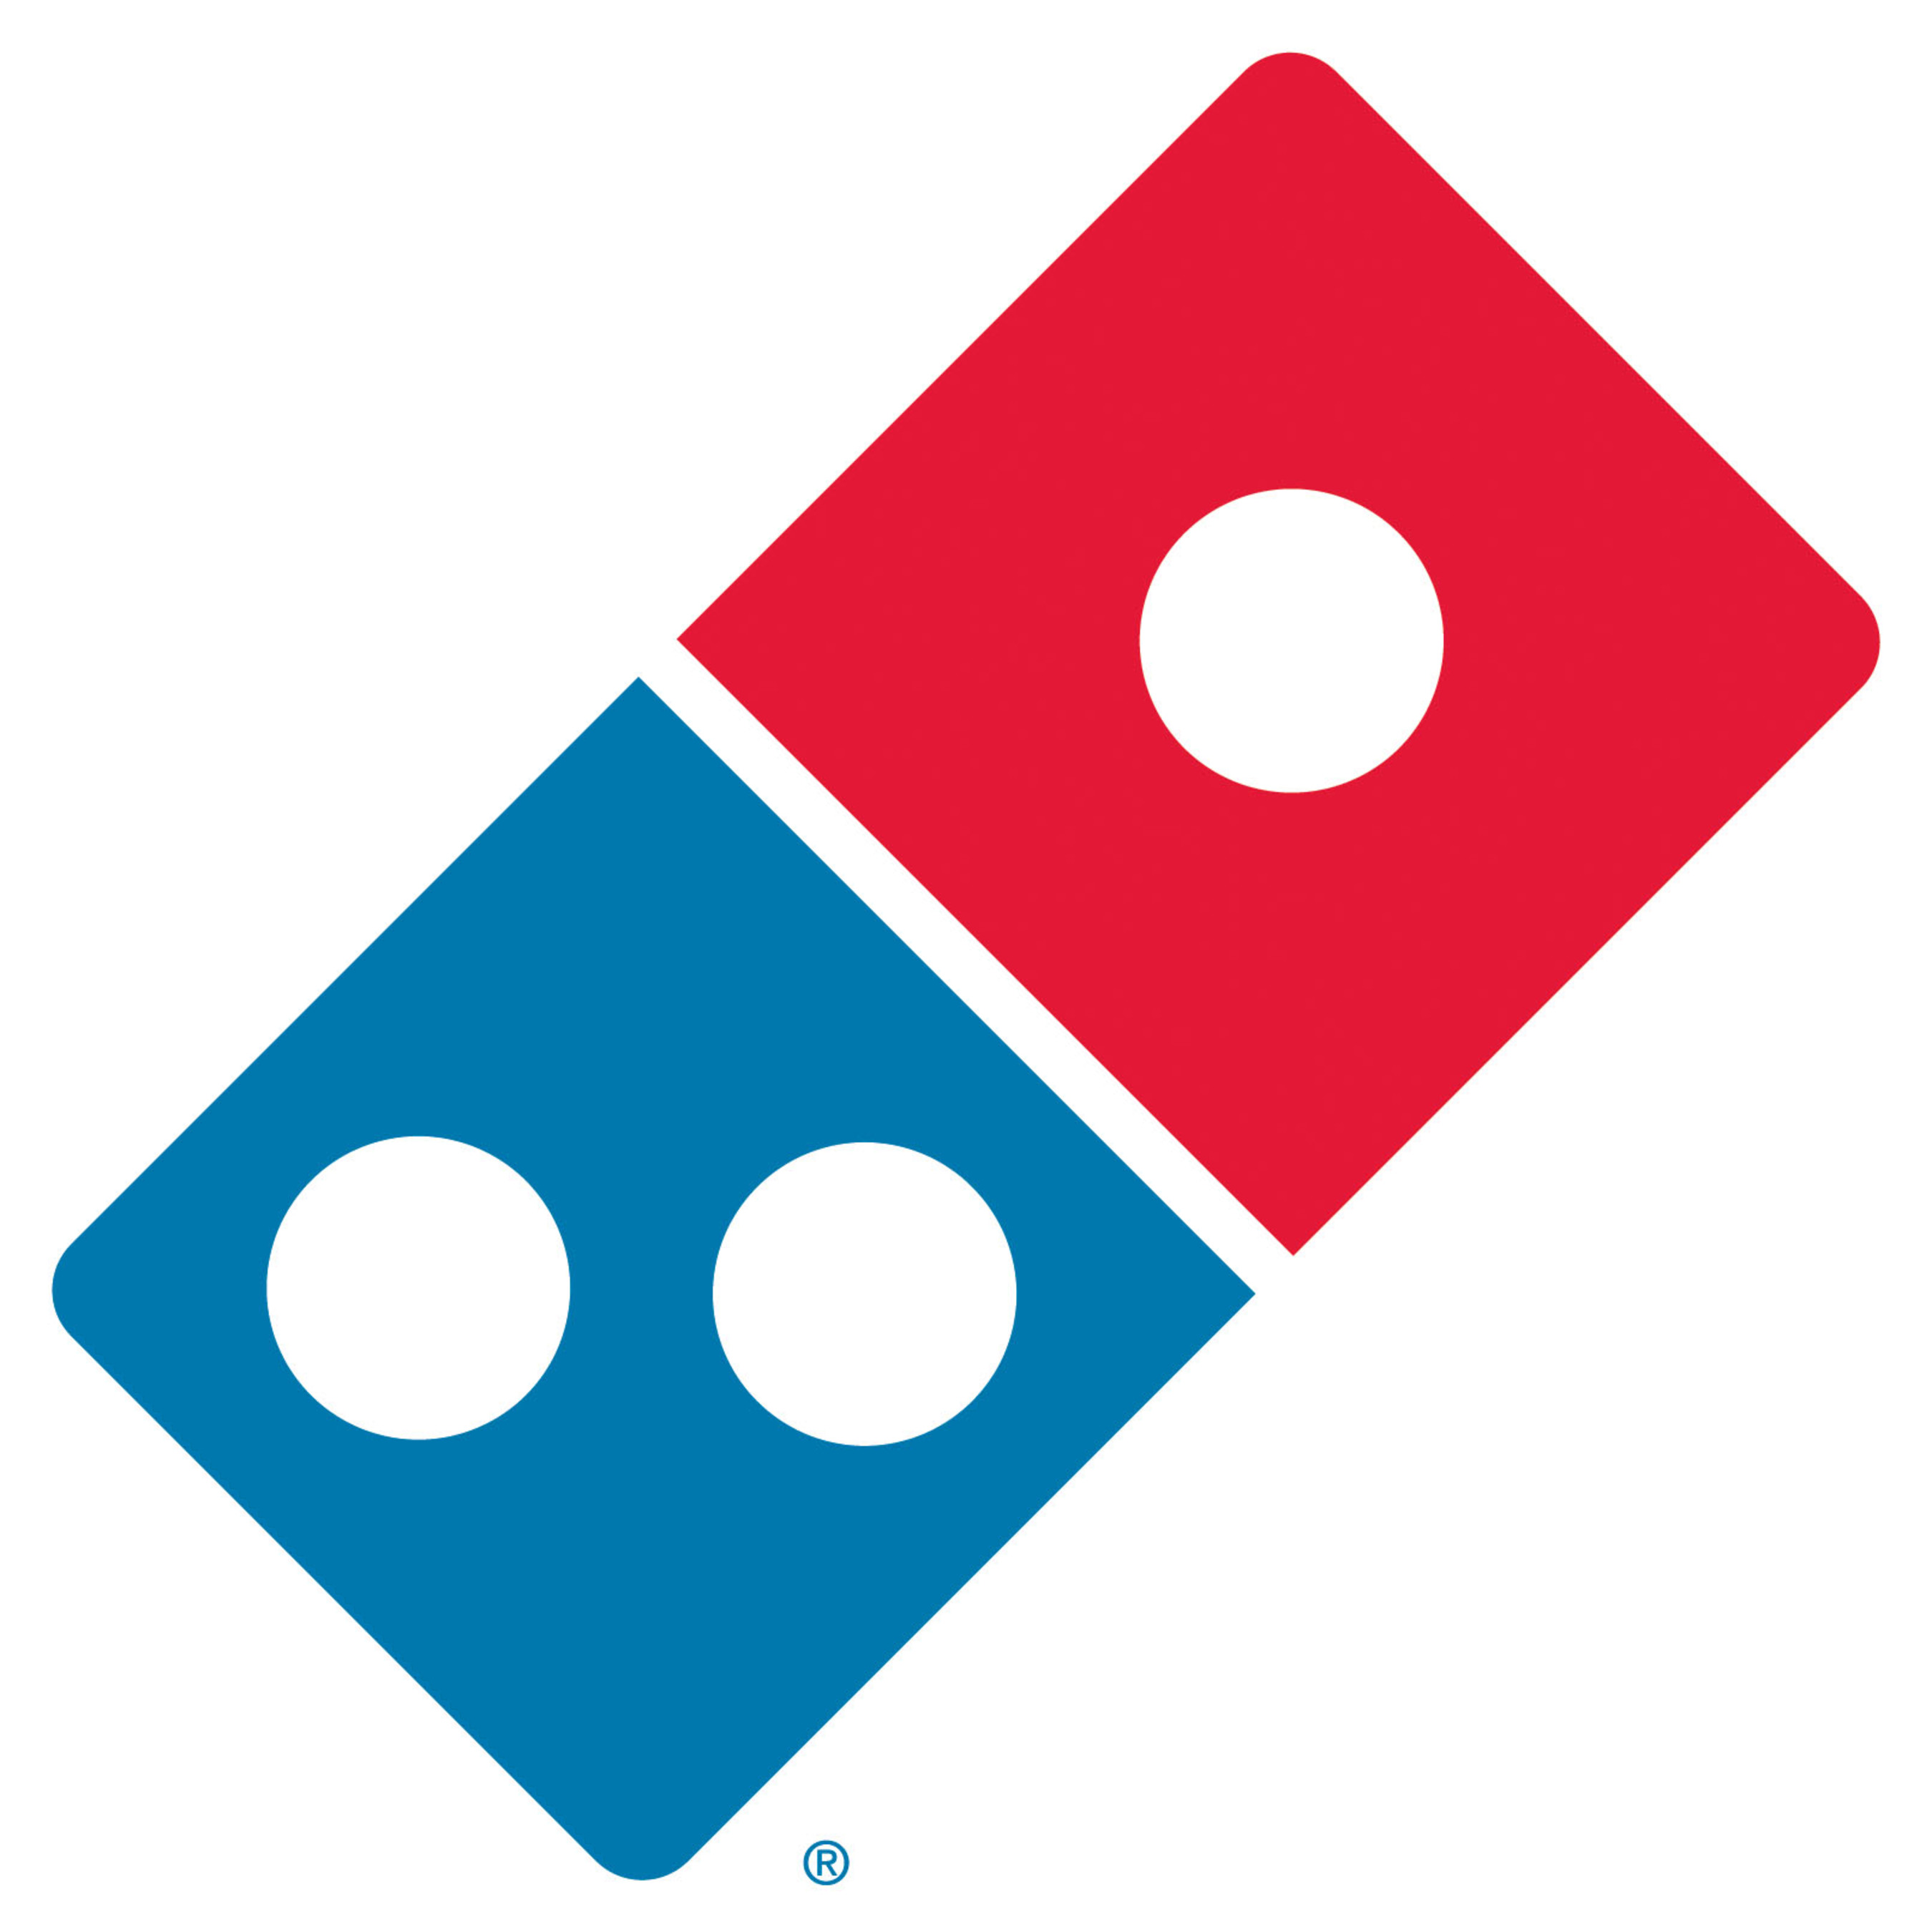 Domino's Pizza unveils new logo. Will be seen on all new stores and those undergoing major renovations.